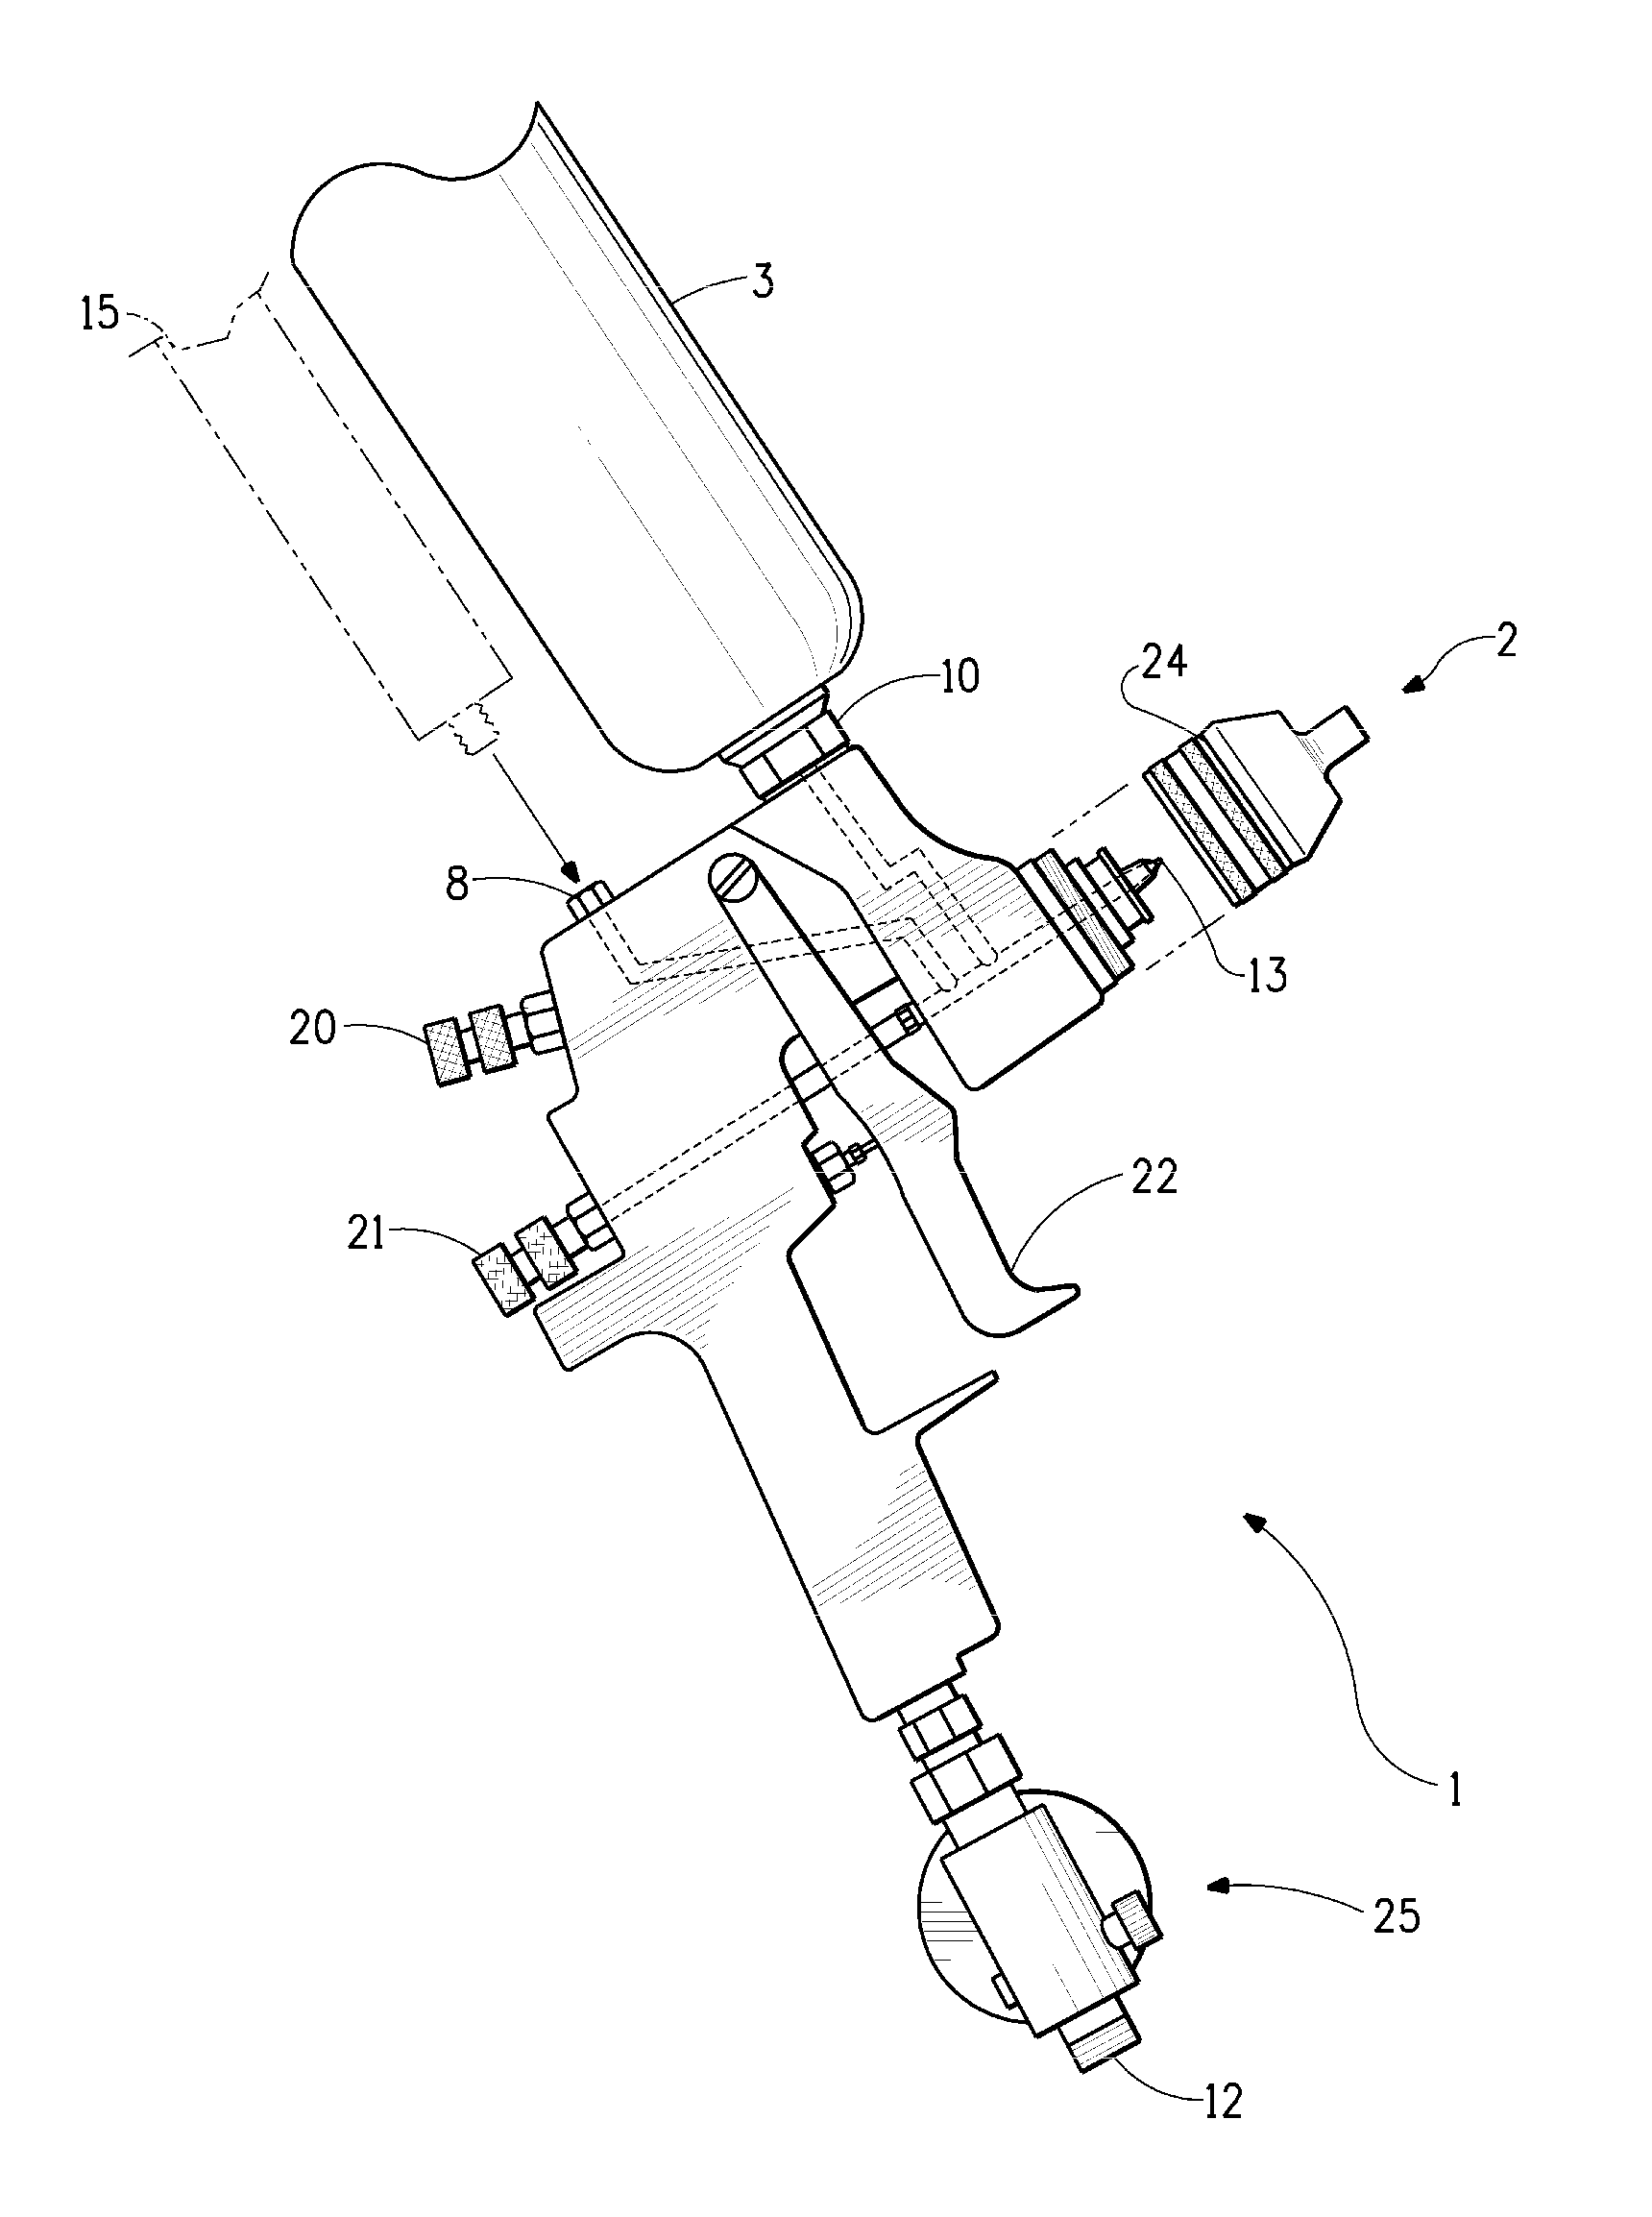 Gravity fed spray device and methods for spraying multiple components